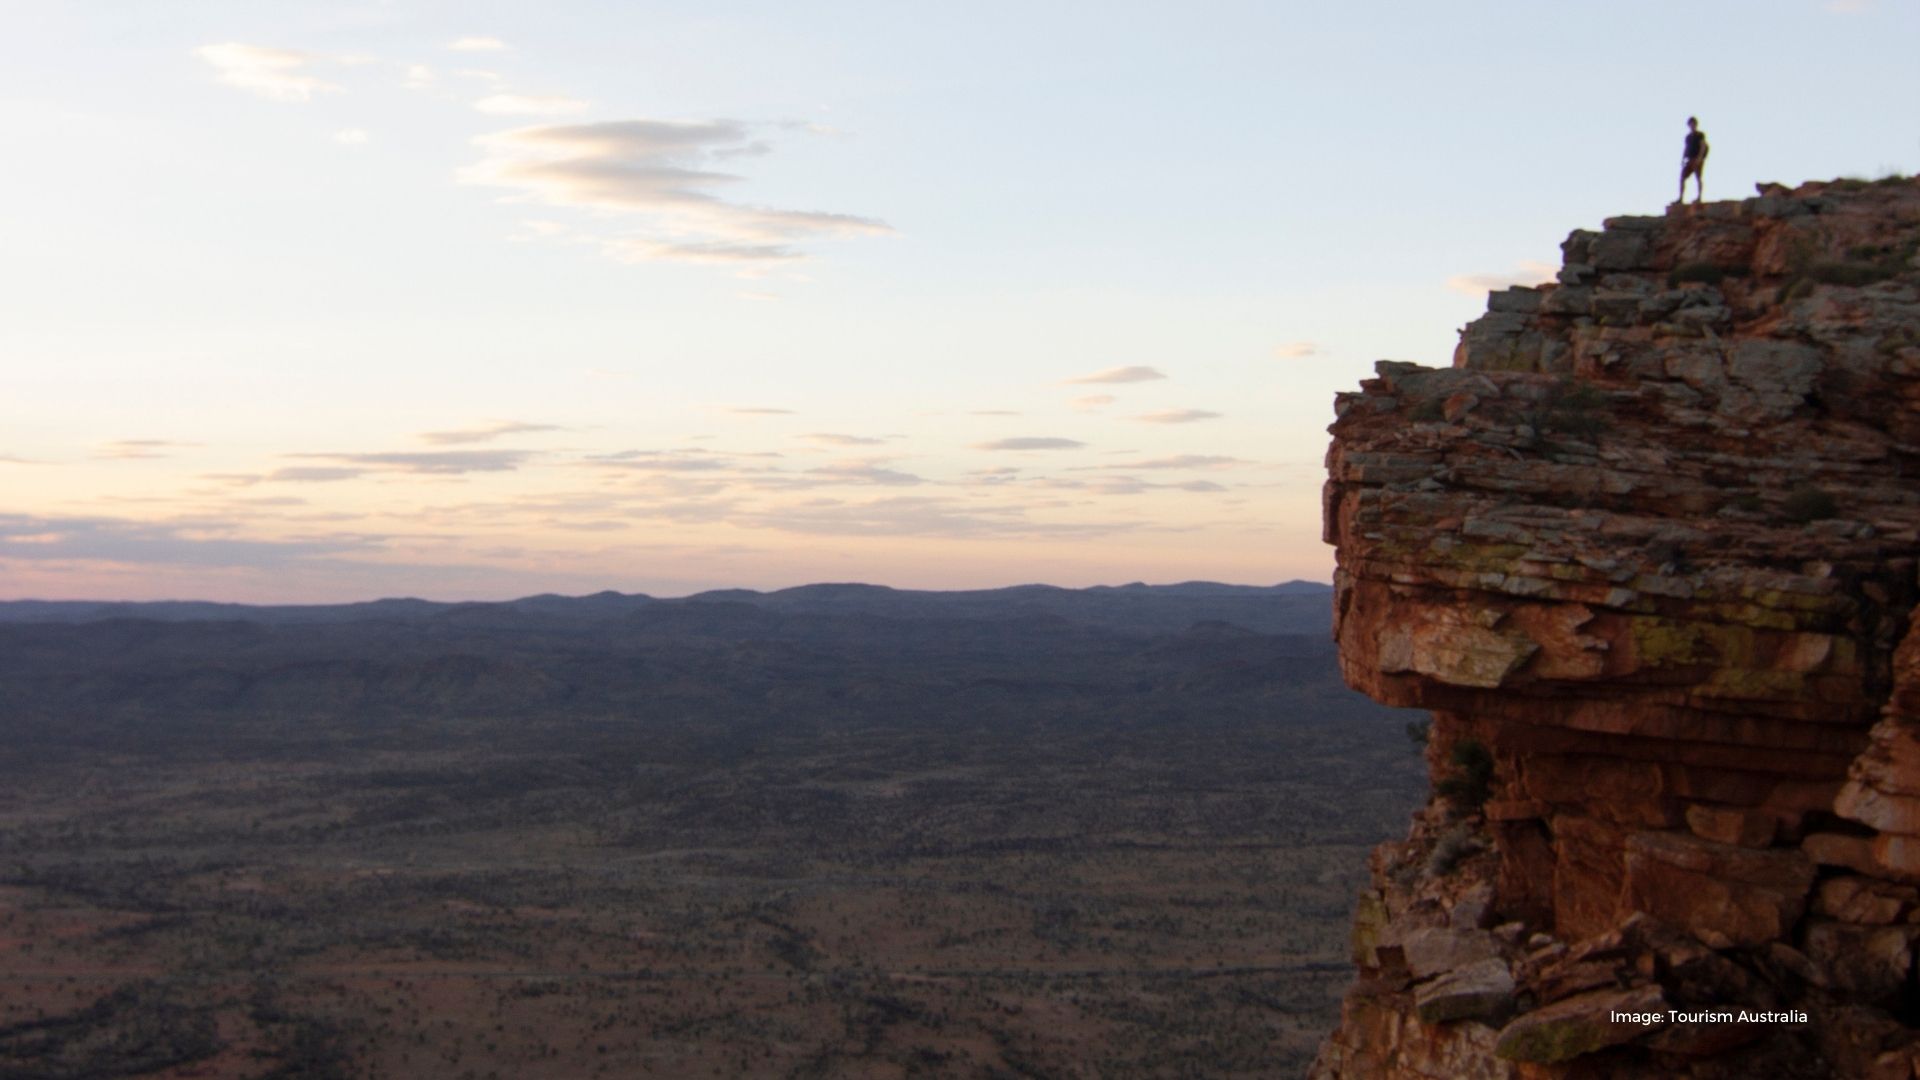 Person looking out over outback landscape from rocky cliff | Tourism Australia